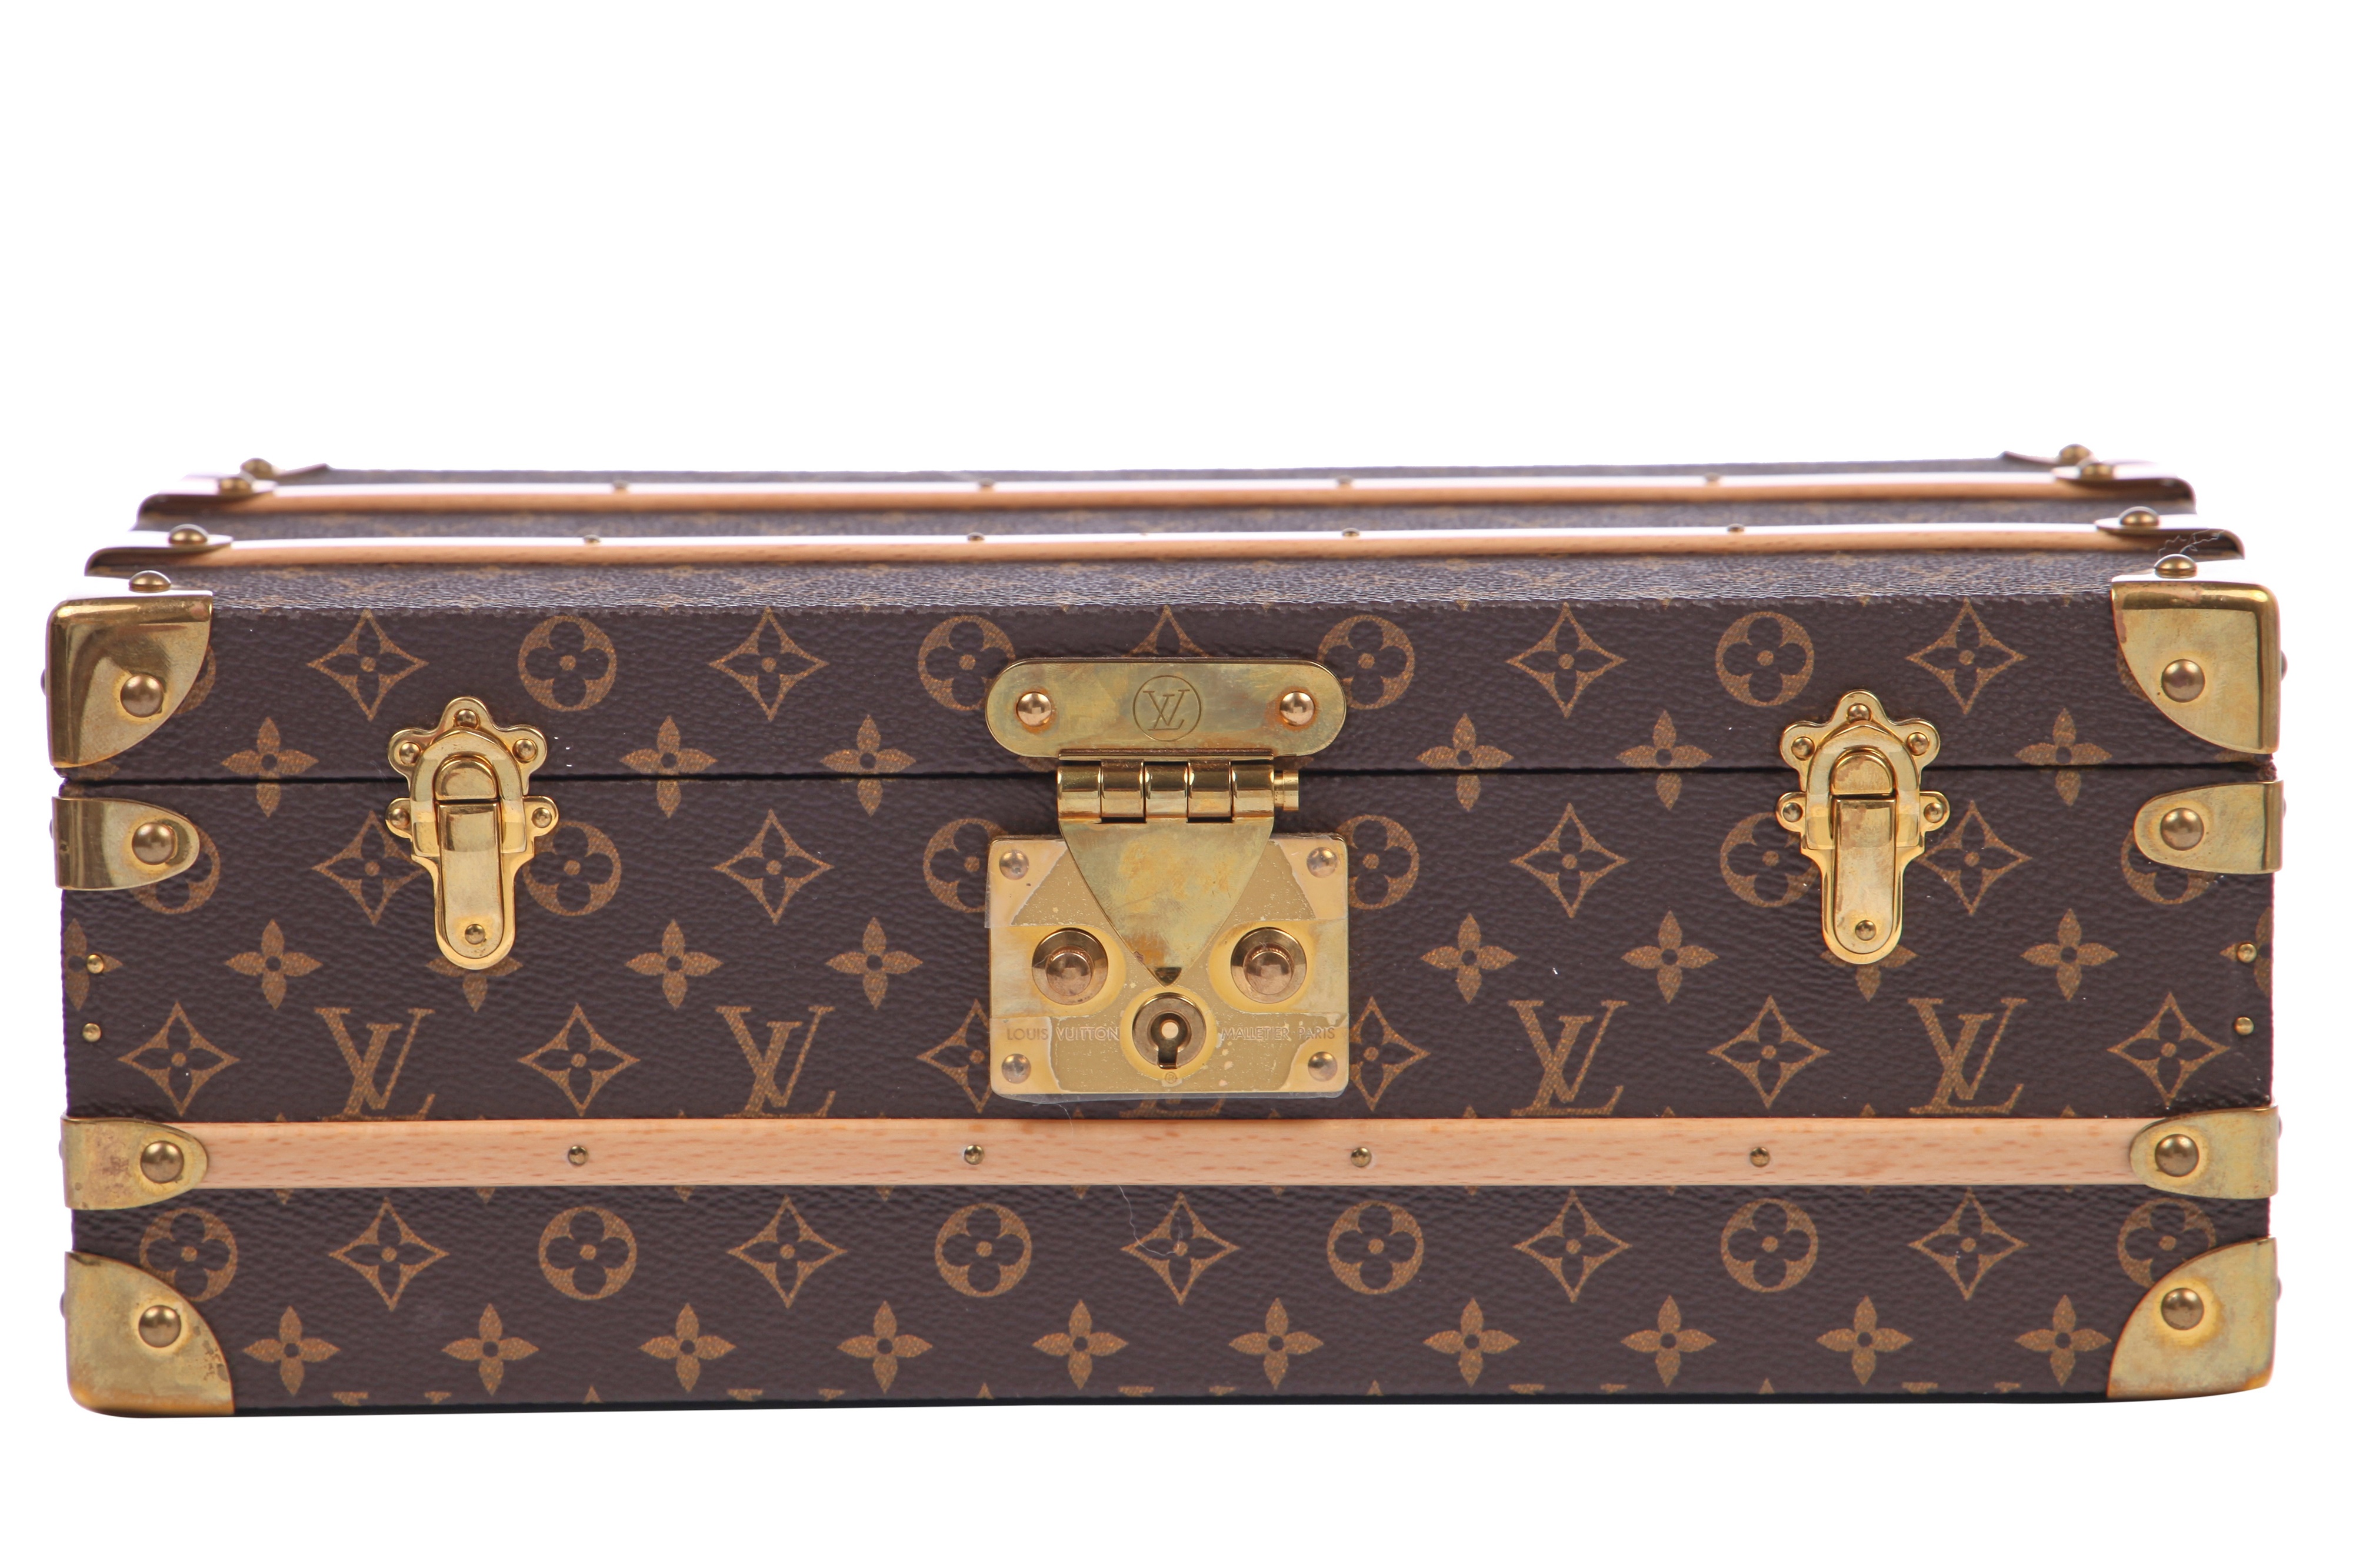 Products By Louis Vuitton: Malle Fleurs Trunk